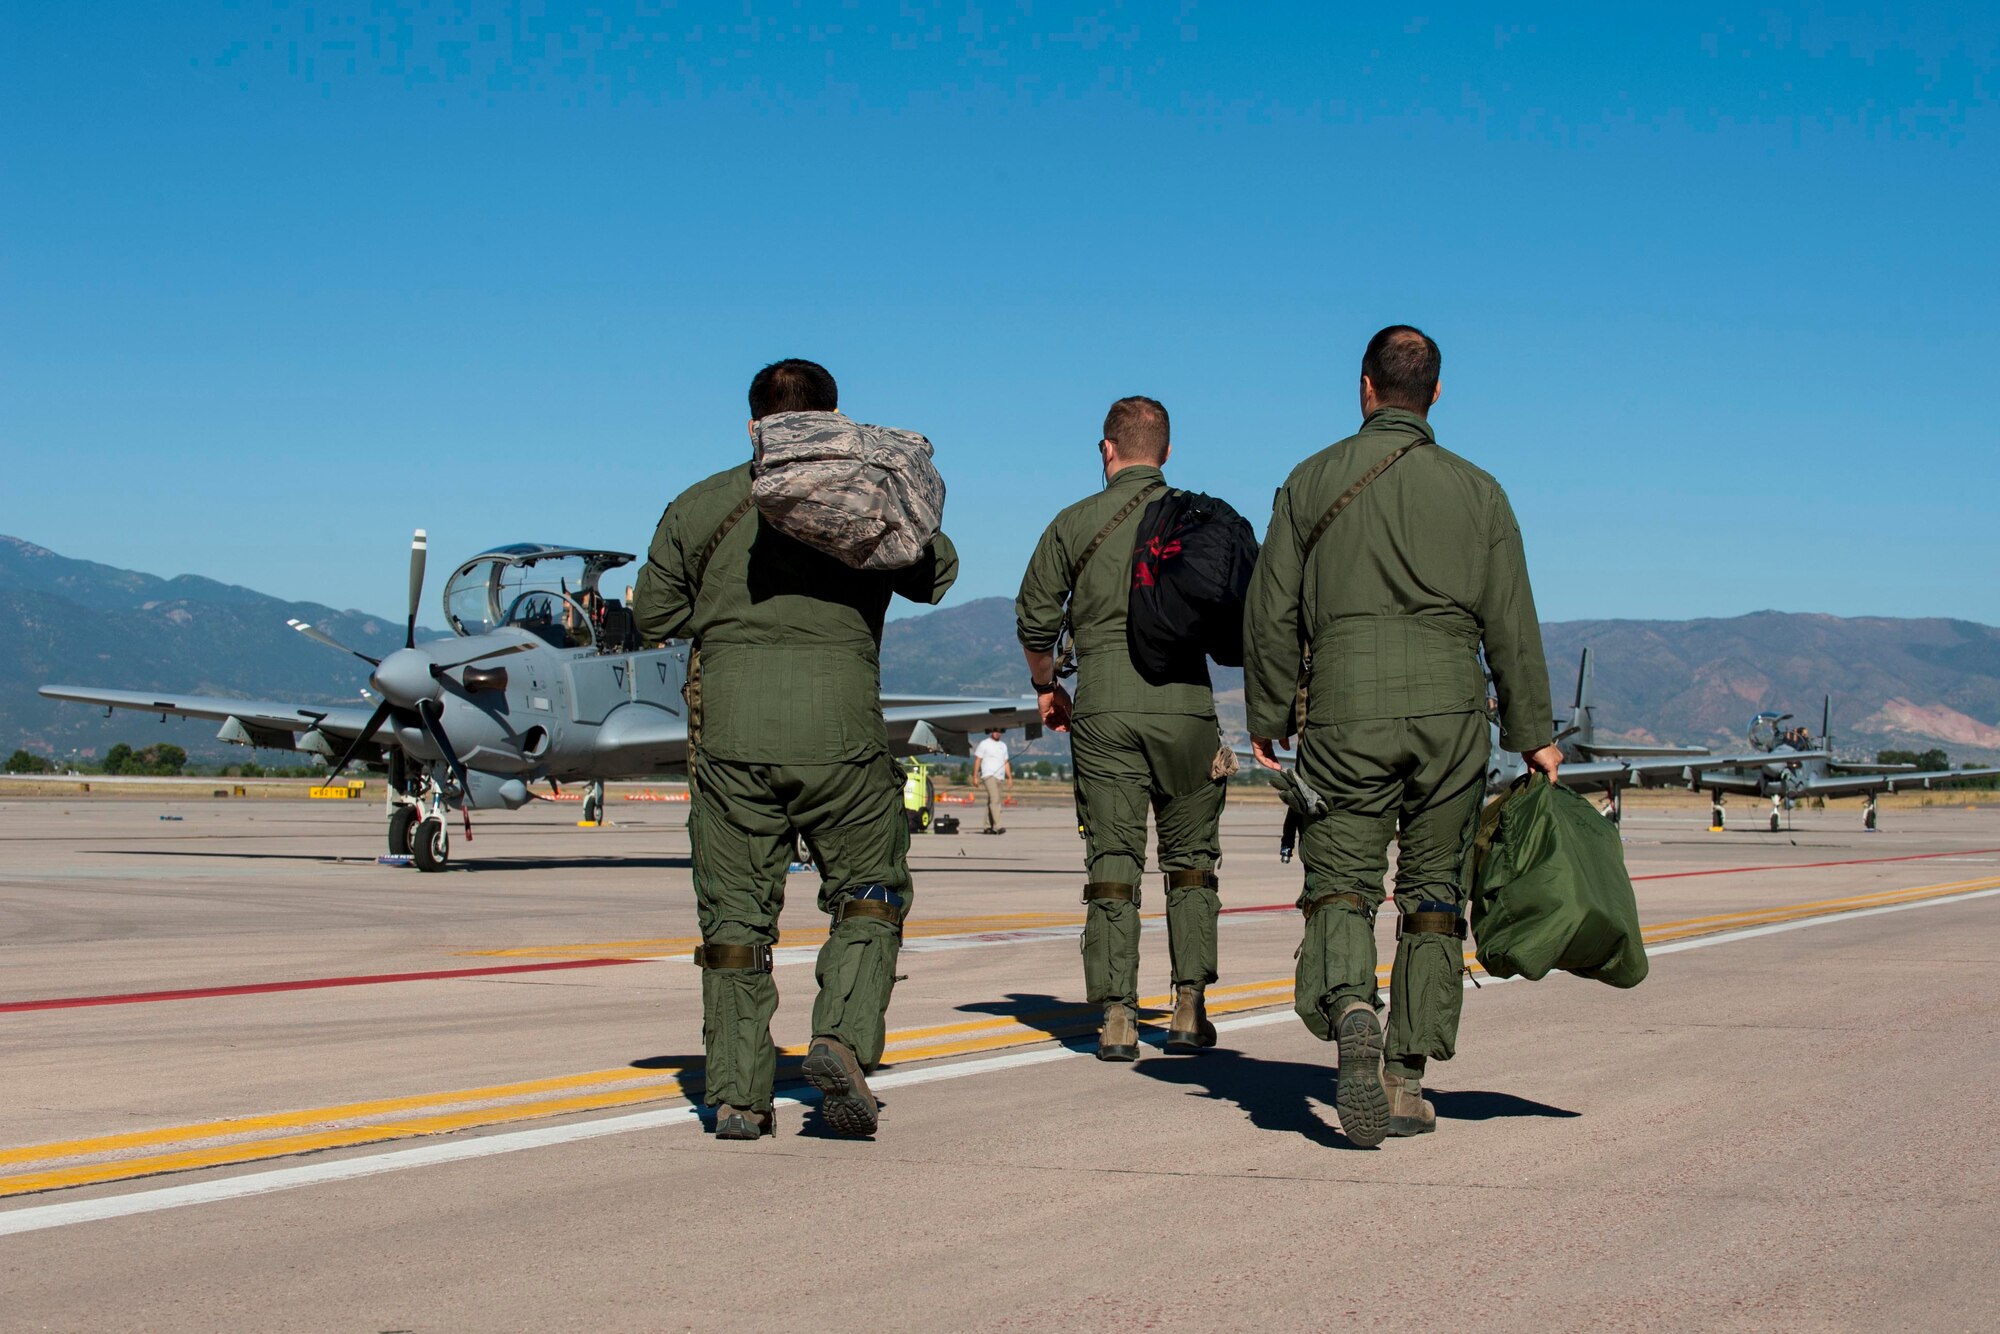 Two pilots from the 81st Fighter Squadron out of Moody Air Force Base, Ga., and an Afghan pilot walk to several A-29B Super Tucanos to prepare for high-altitude training Sept. 16, 2015, at Peterson Air Force Base, Colo. Four Afghan pilots have been training with the 81st FS on the aircraft since January in Georgia and came to Peterson to experience high-altitude and mountainous terrain. After completing their training in the U.S., both the American and Afghan pilots will go to Afghanistan to help establish fighter squadrons. (U.S Air Force photo/Airman 1st Class Rose Gudex)